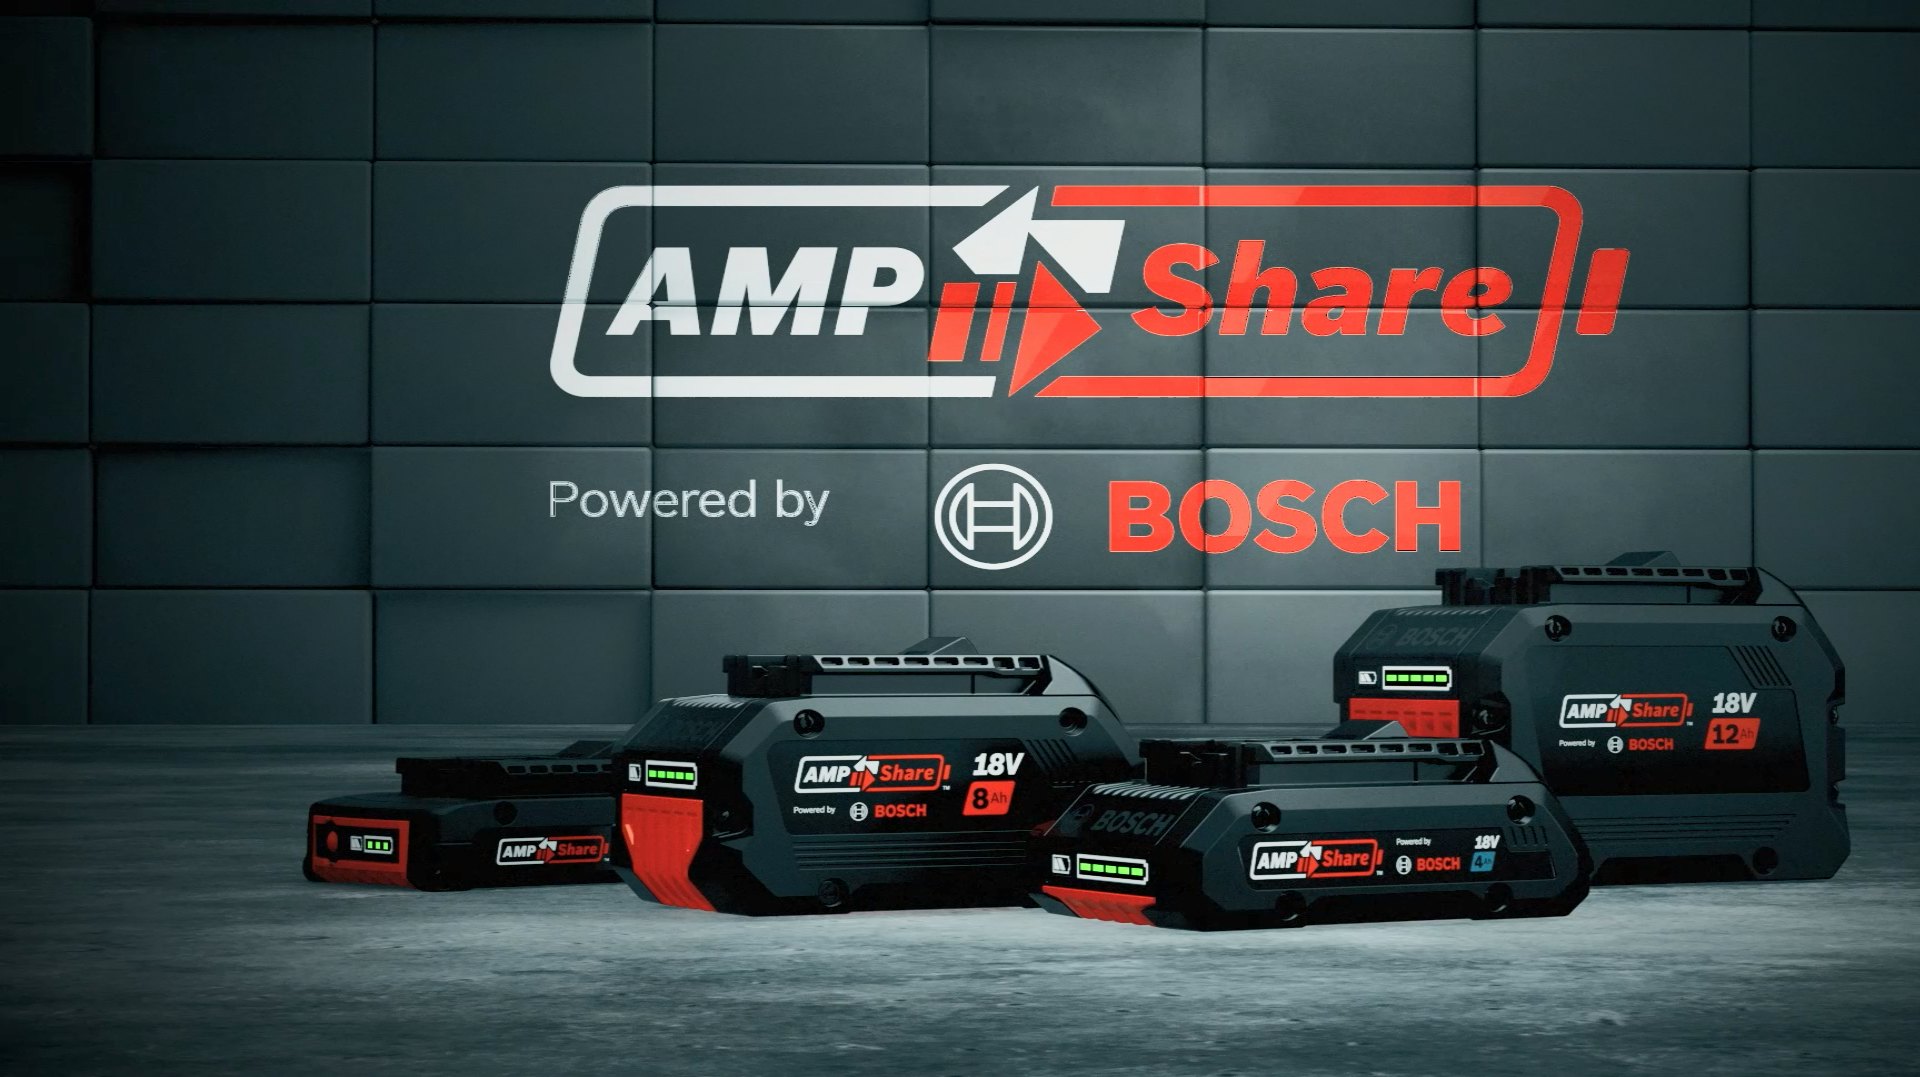 AMPShare - Powered by Bosch Multi-Brand 18V Battery Platform From